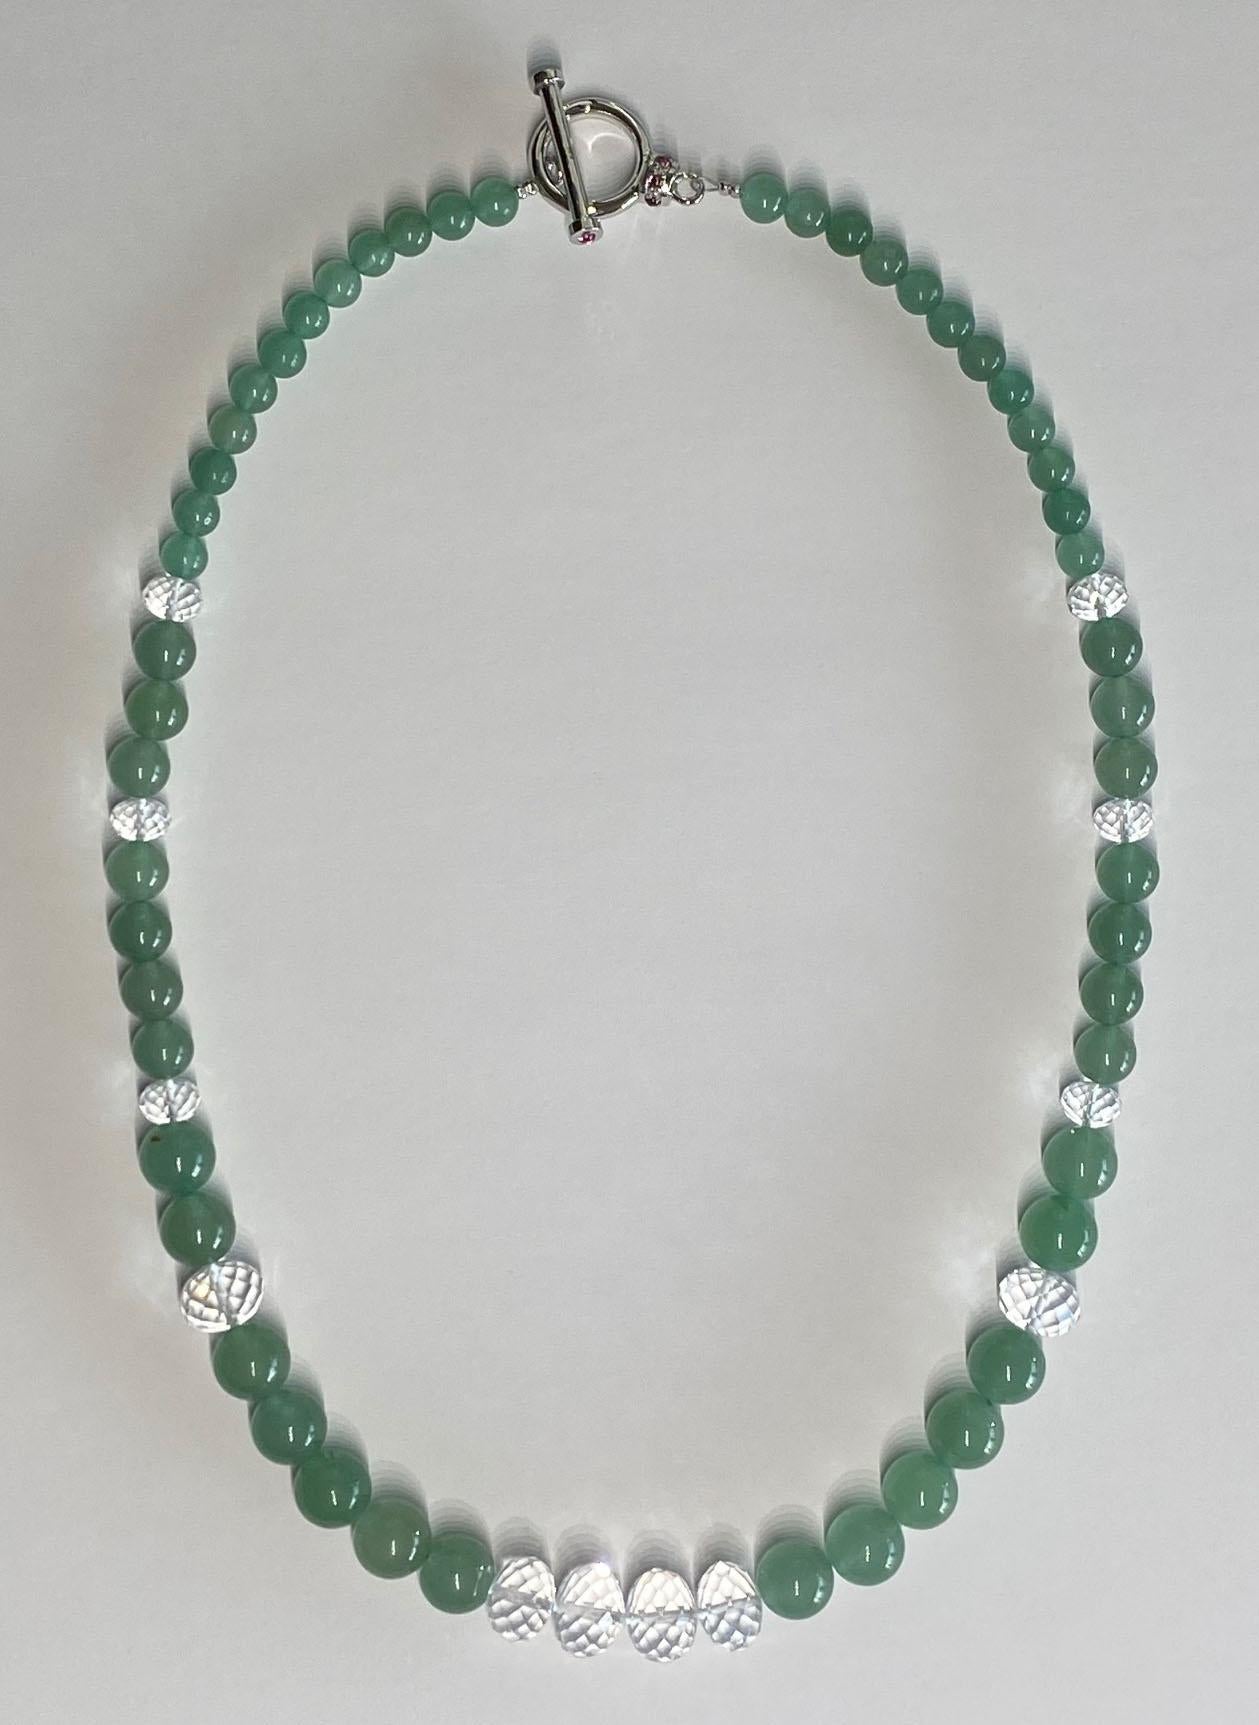 Kary Adam Designed, Aventurine & Quartz Faceted Rondelle Necklace with a Silver T-Bar clasp. Clasp is set with small Pink Tourmaline Cabochons.

Originally from San Diego, California, Kary Adam lived in the “Gem Capital of the World” - Bangkok,